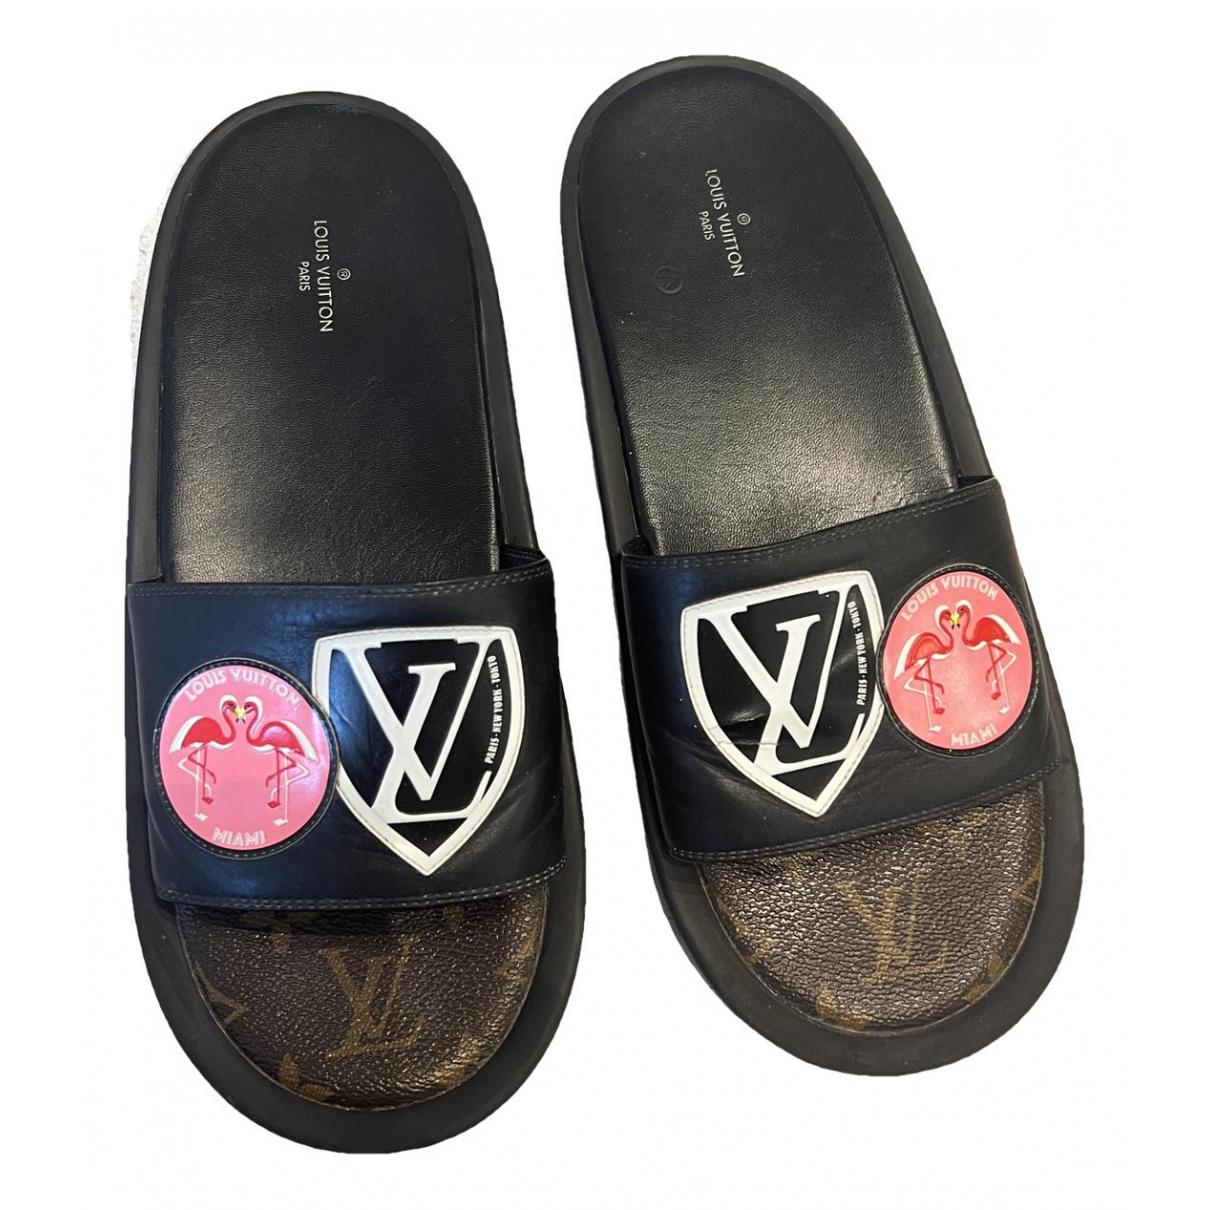 louis vuitton slippers for ladies